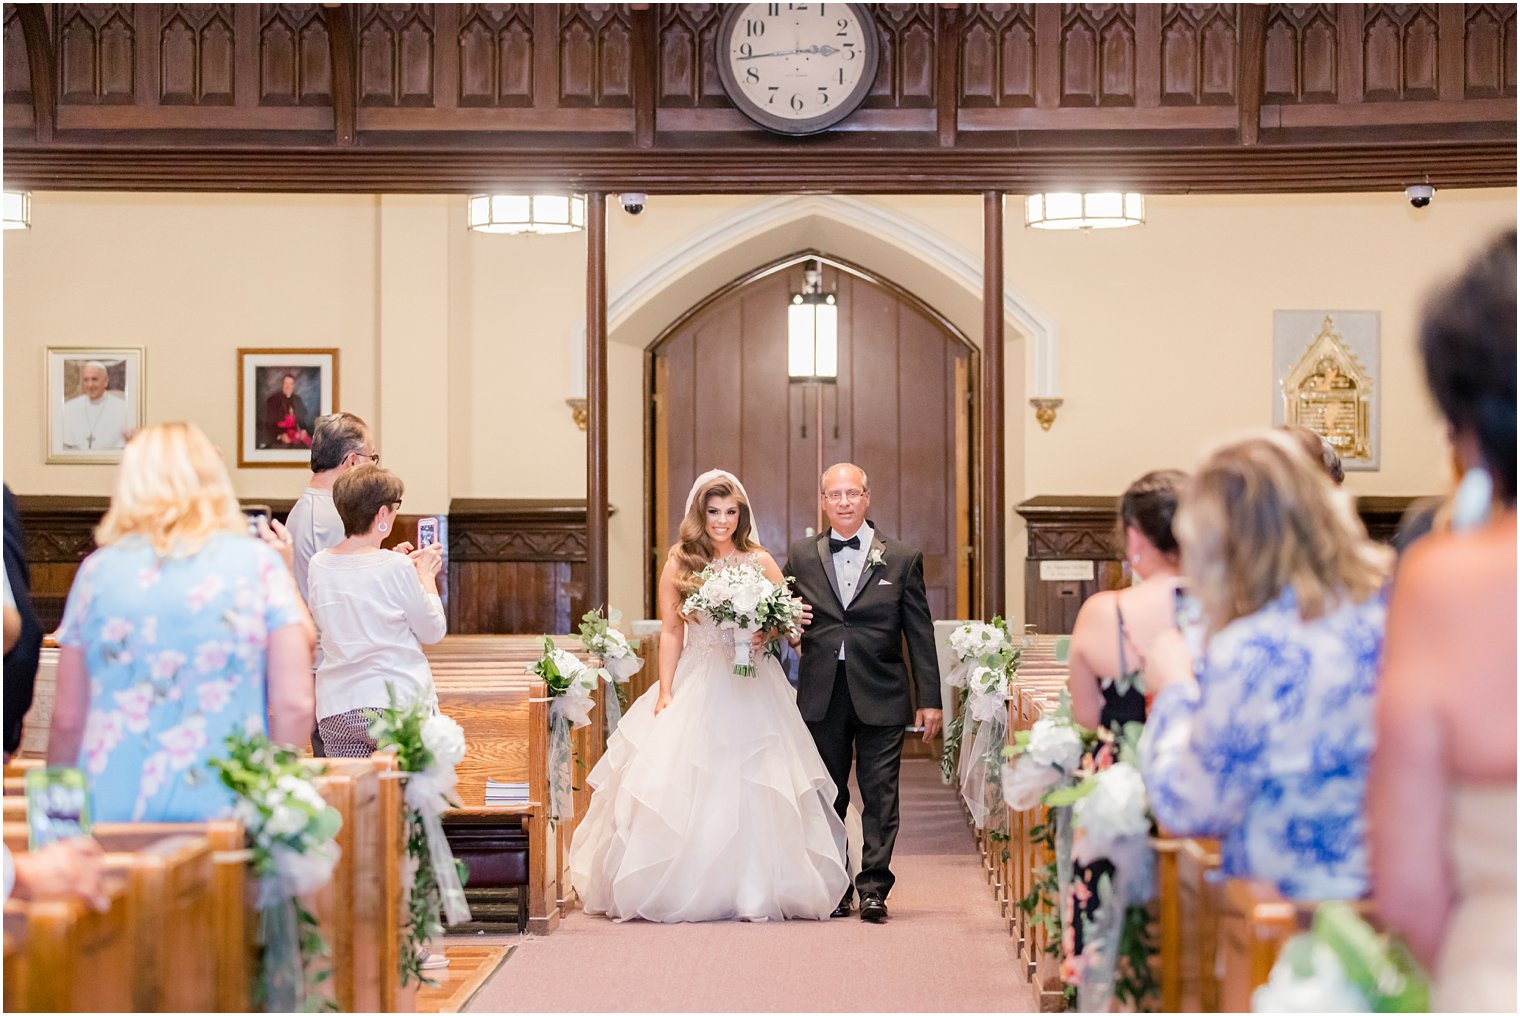 Wedding processional at St. Peter the Apostle in New Brunswick NJ